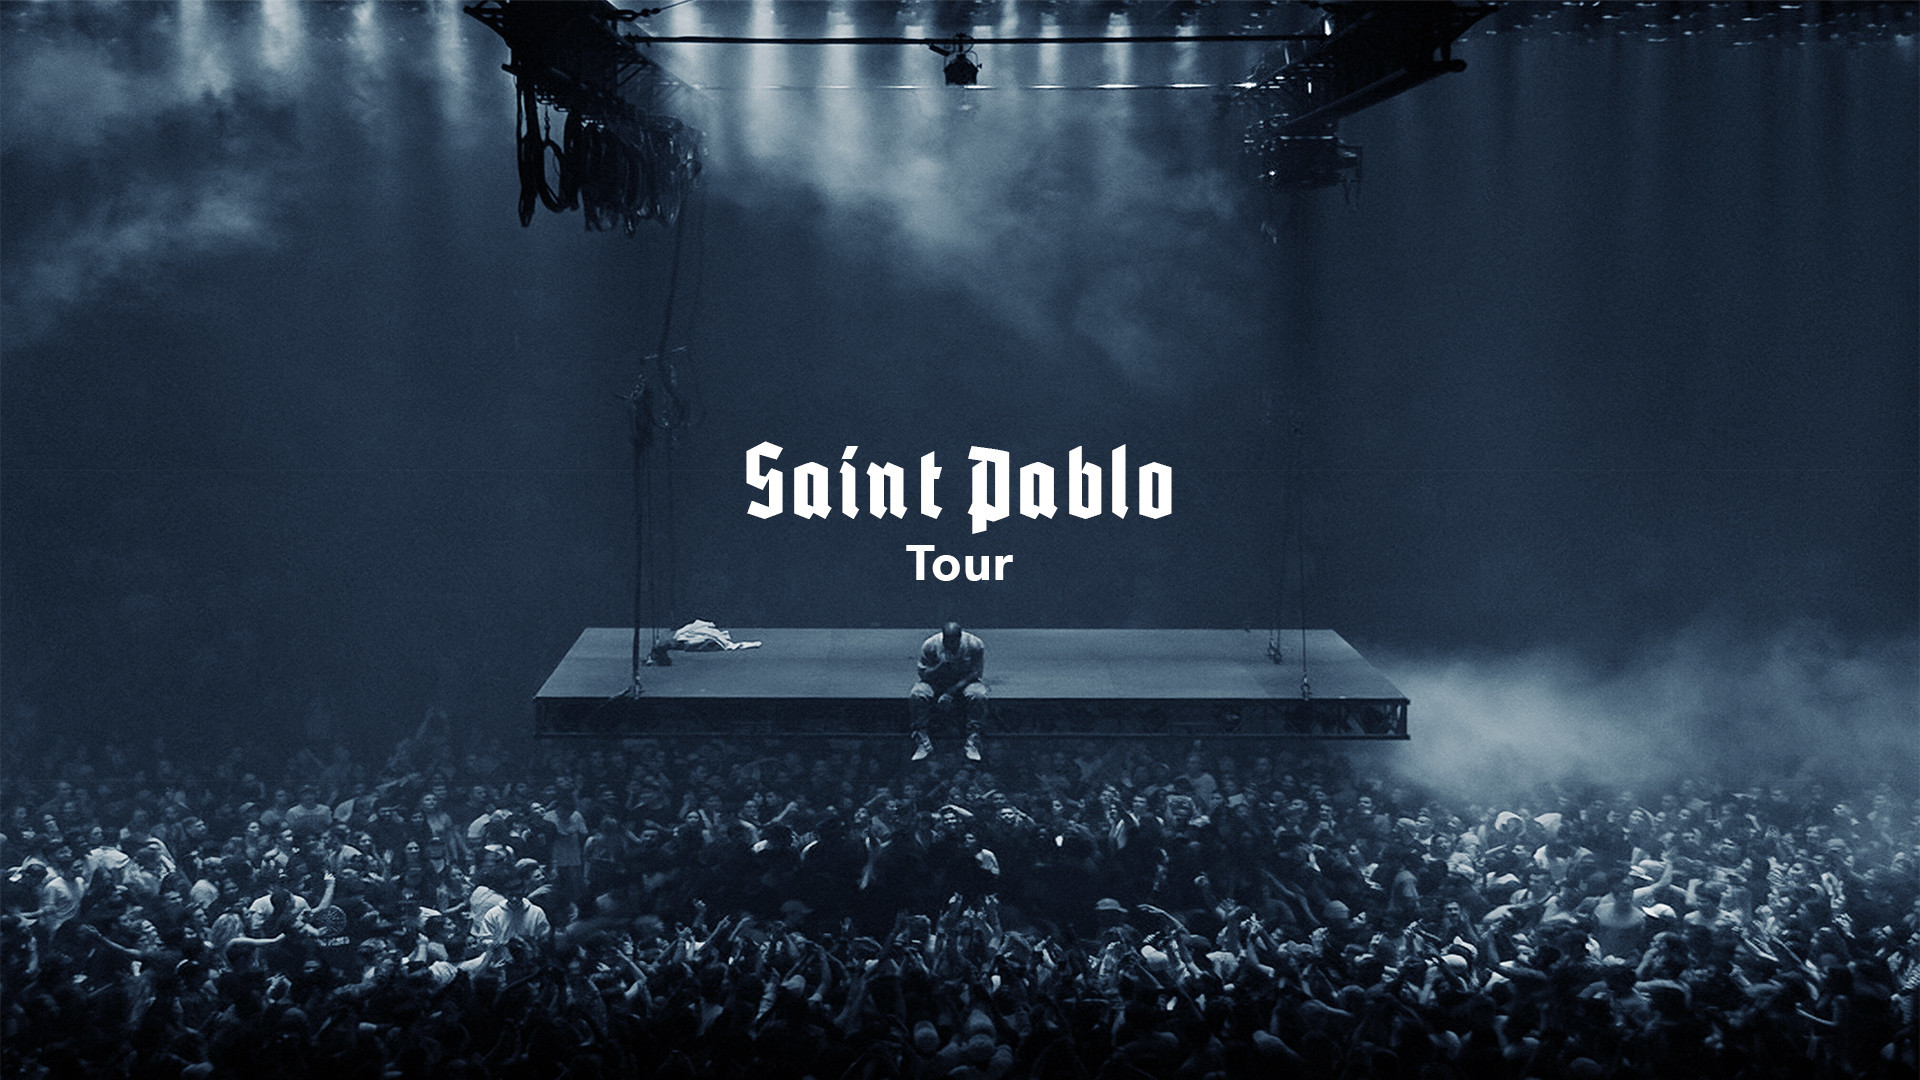 1920x1080 Made a Wallpaper for the Saint Pablo Tour ...